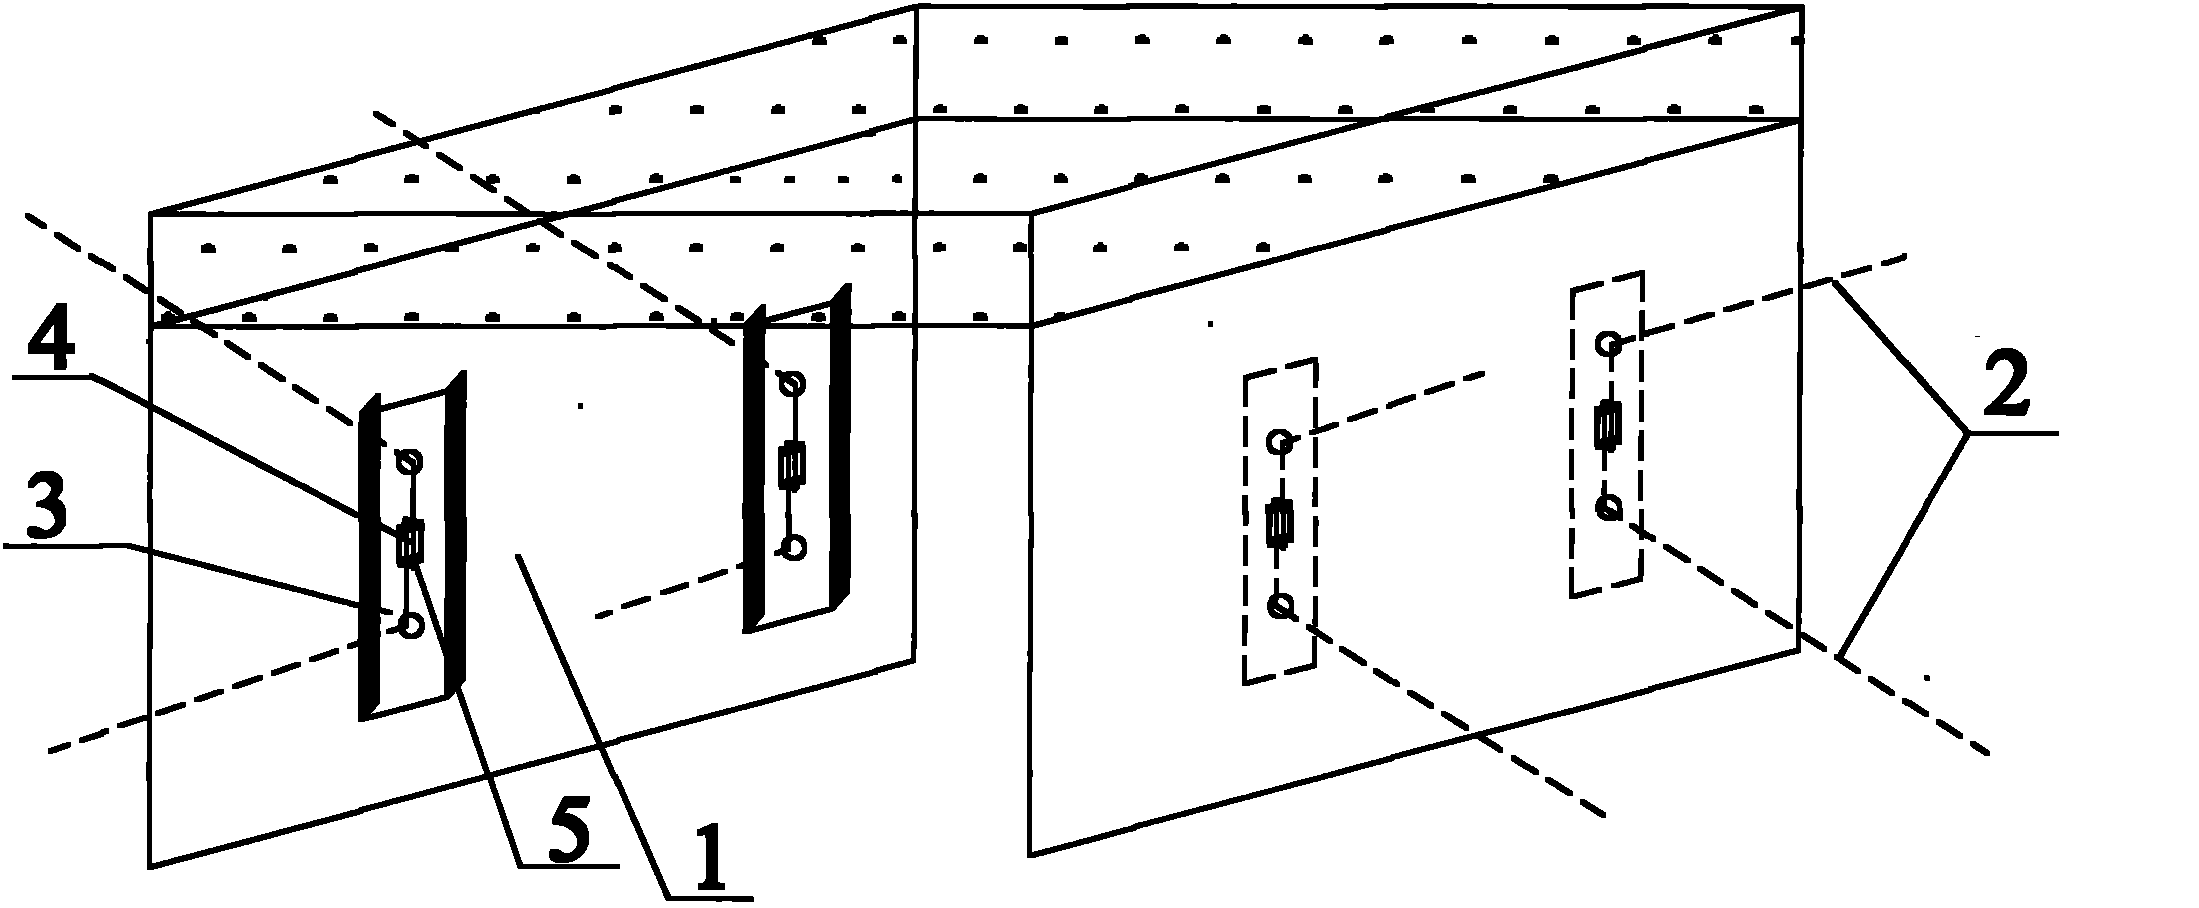 Structure and method for preventing large deformation slippage of lateral wall of high stress tunnel